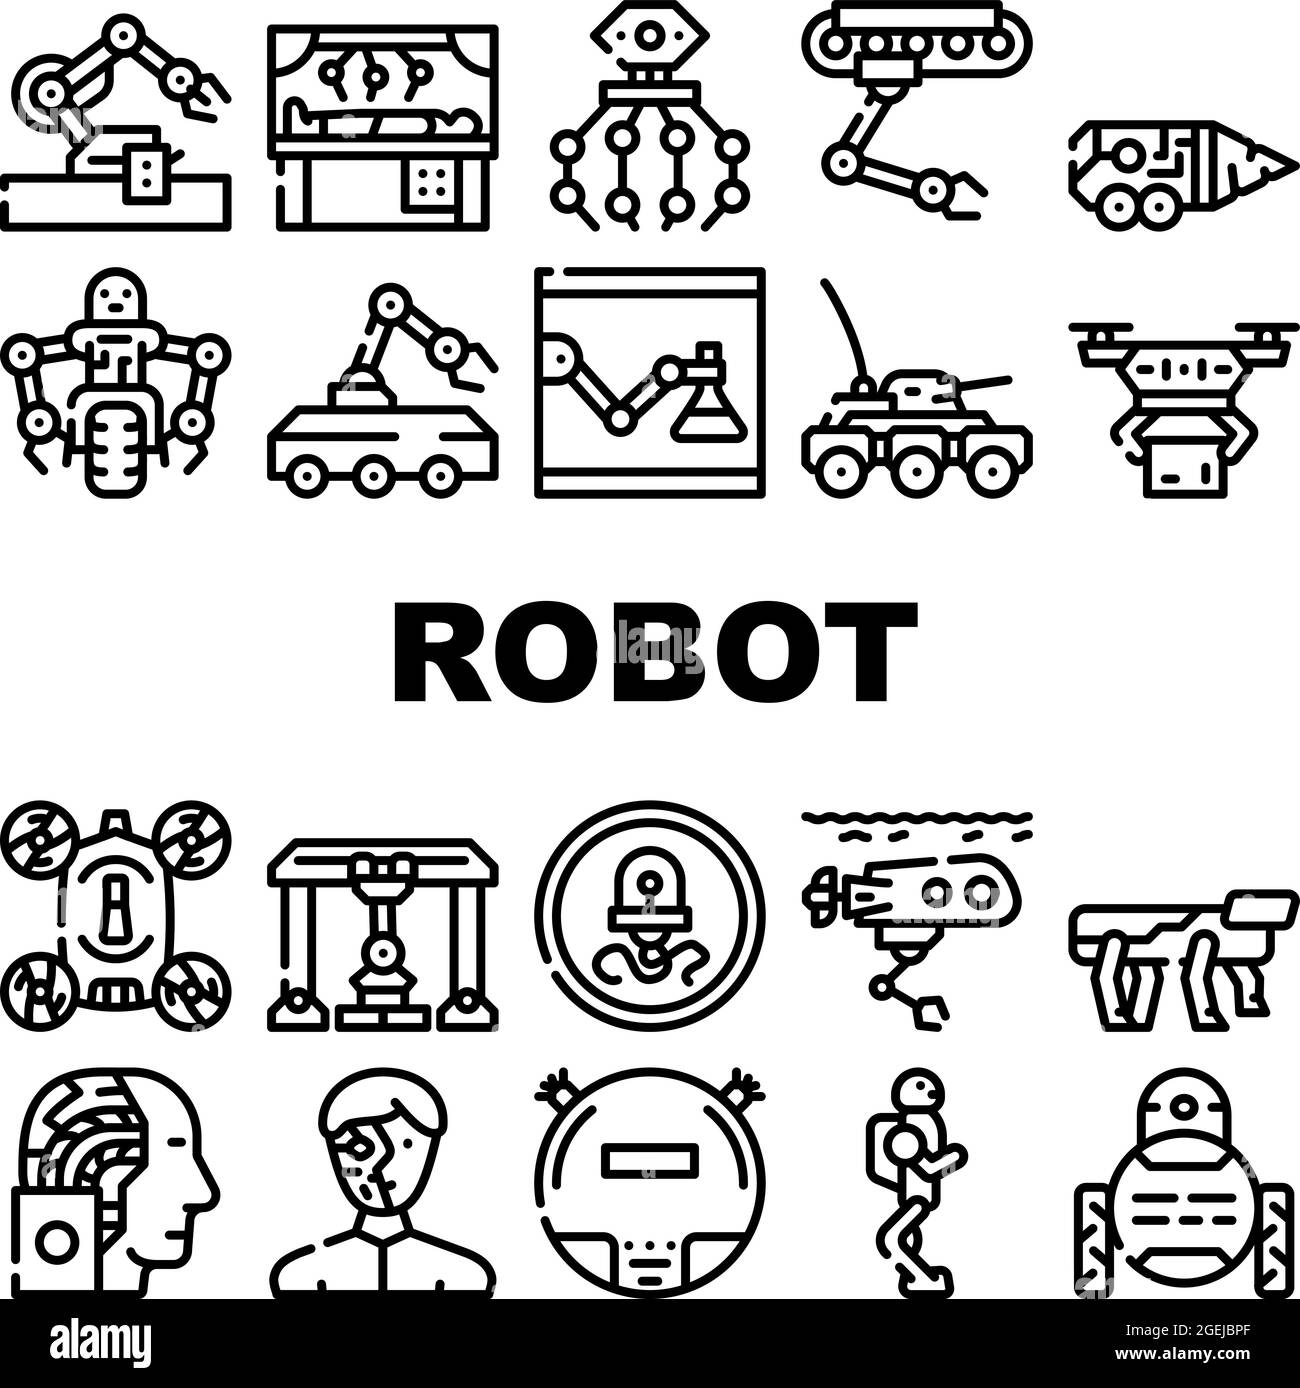 Robot Future Electronic Equipment Icons Set Vector Stock Vector Image